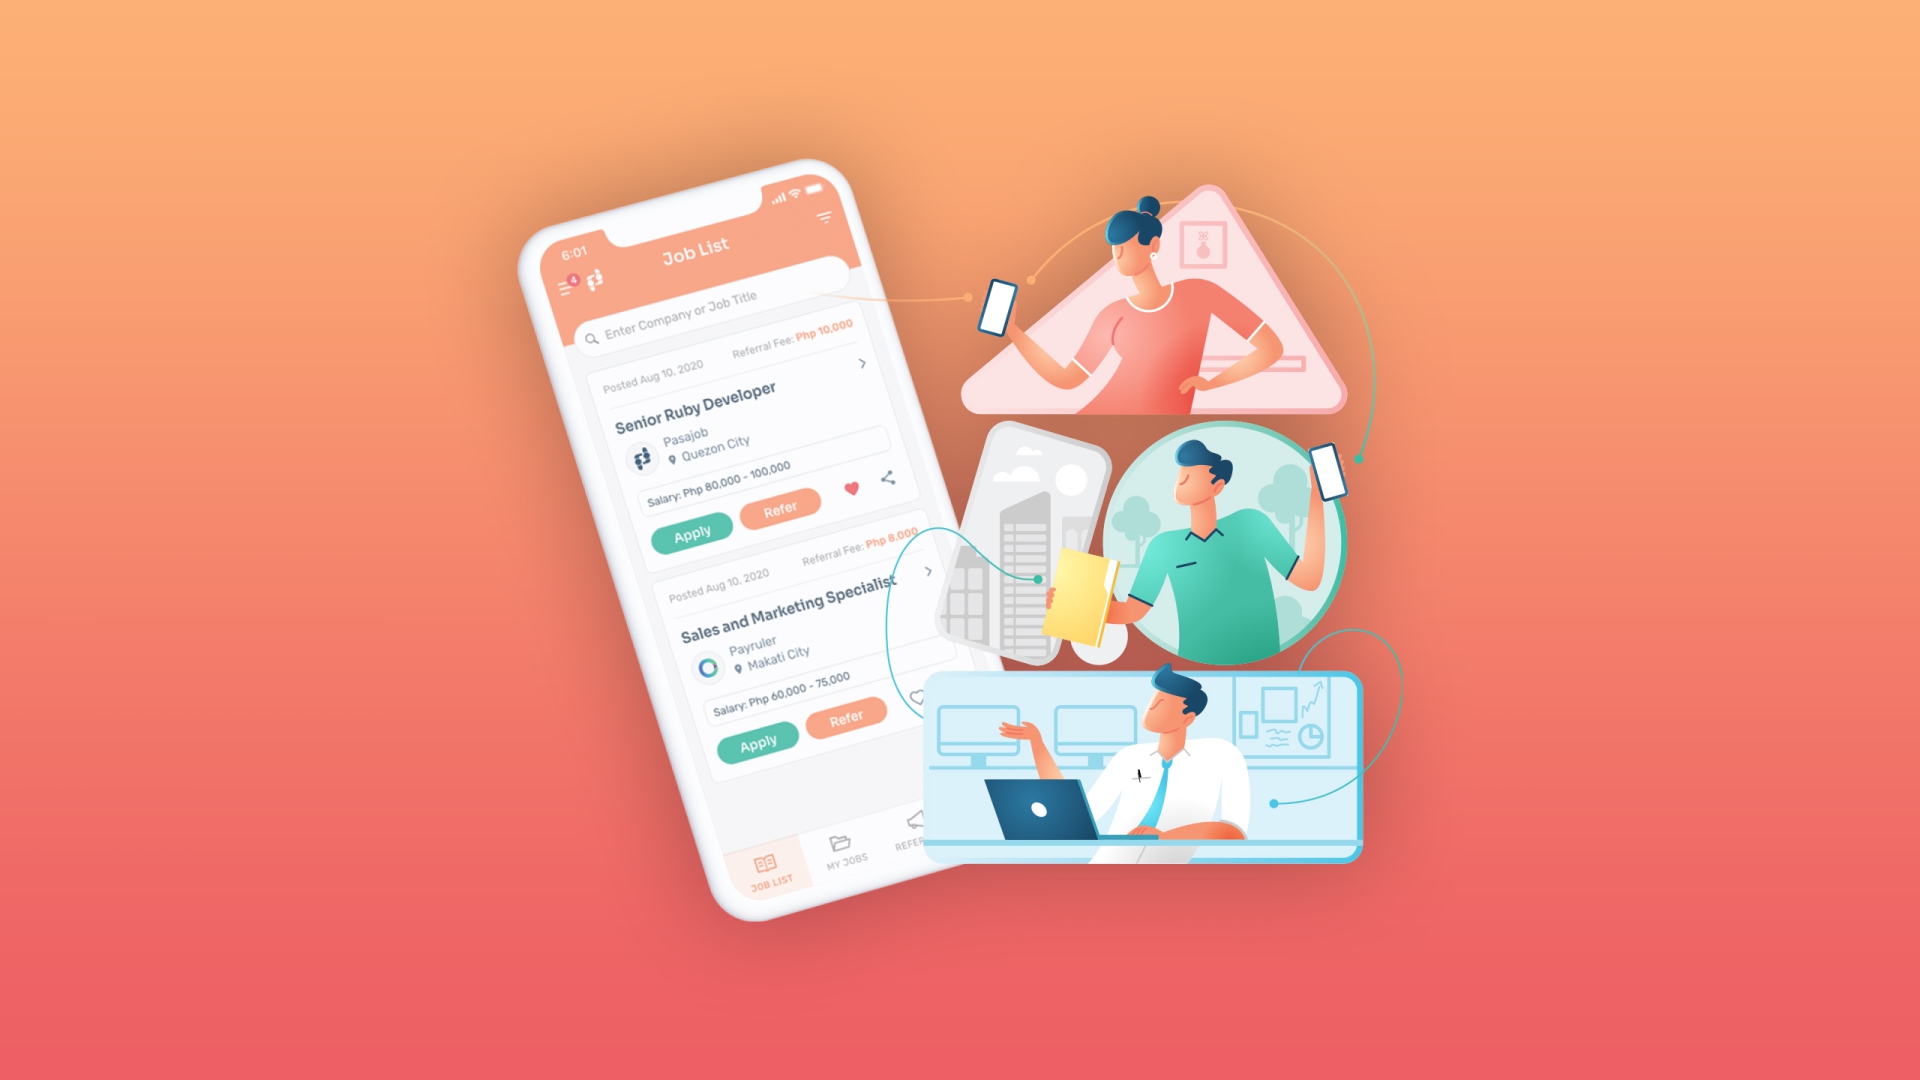 Vector illustration representing people using a mobile app